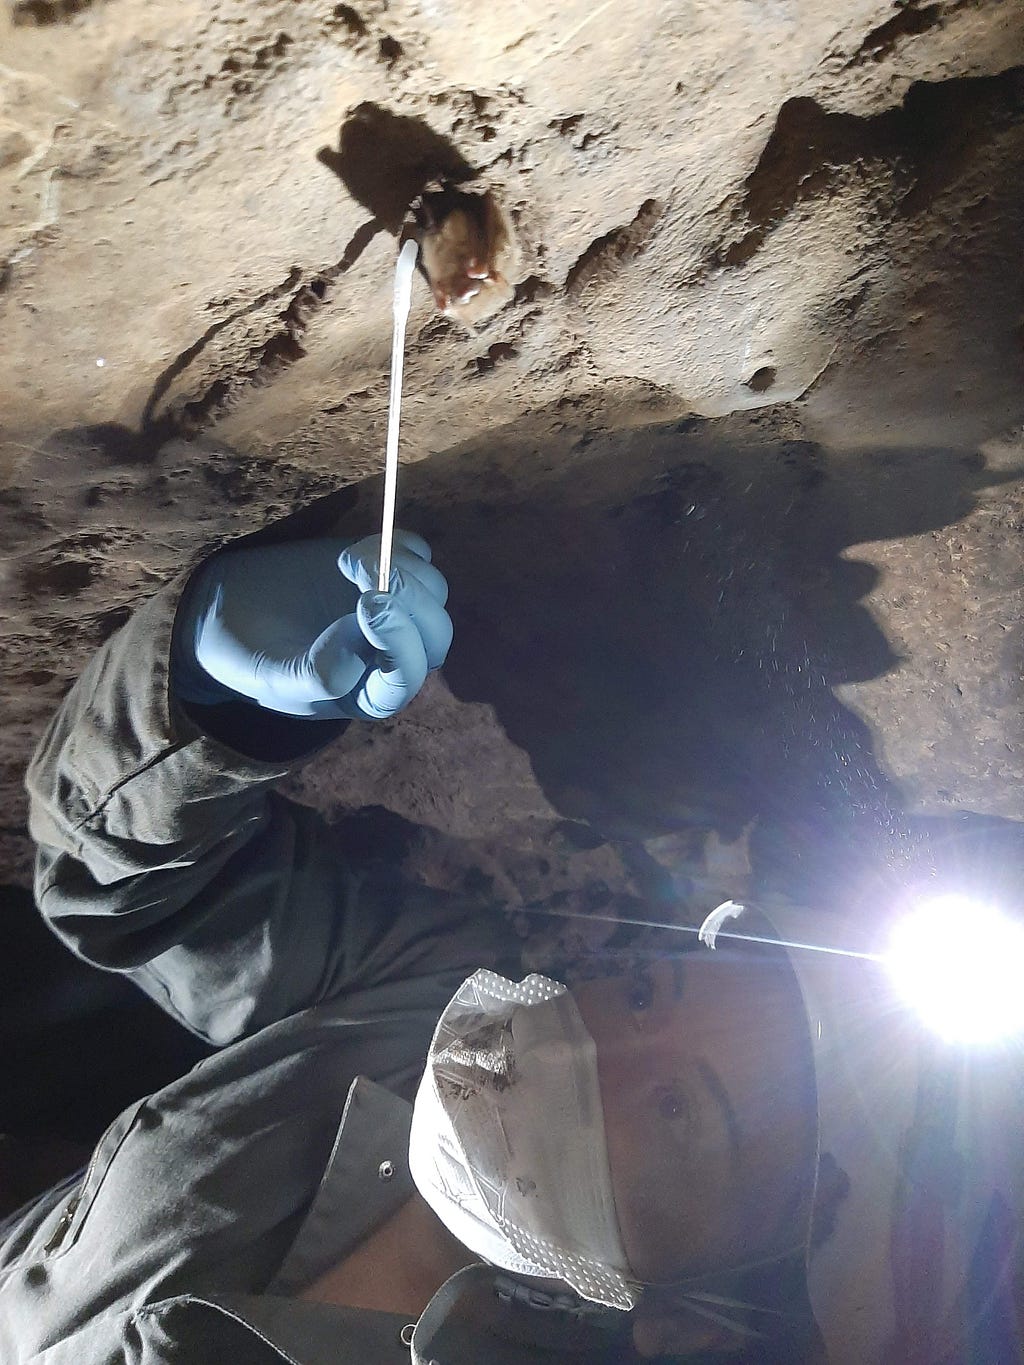 Kris geared up with helmet and headlight during research and monitoring for white nose syndrome on tricolored bats. Photo Credit: Vona Kuczynska